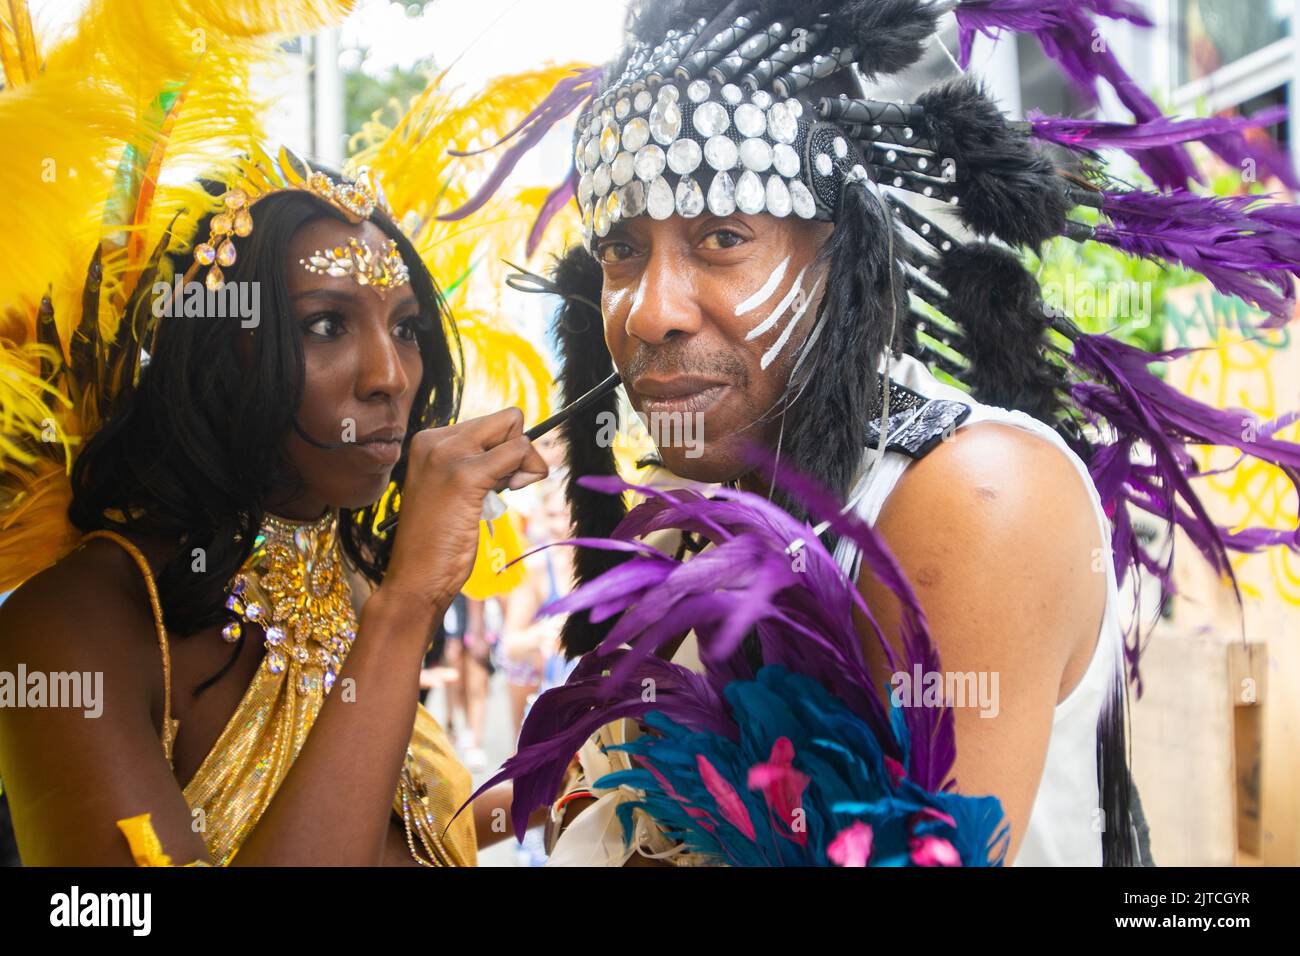 London, UK. 29th Aug, 2022. On Da Road with COCOYEA at Notting Hill Carnival 2022. Follow mas band COCOYEA through Notting Hill Carnival which is back after the years of COVID. Fantasy costumes and regional dress beguiled the eye and a man from Brazil rode a Tyrannosaurus Rex. Credit: Peter Hogan/Alamy Live News Stock Photo